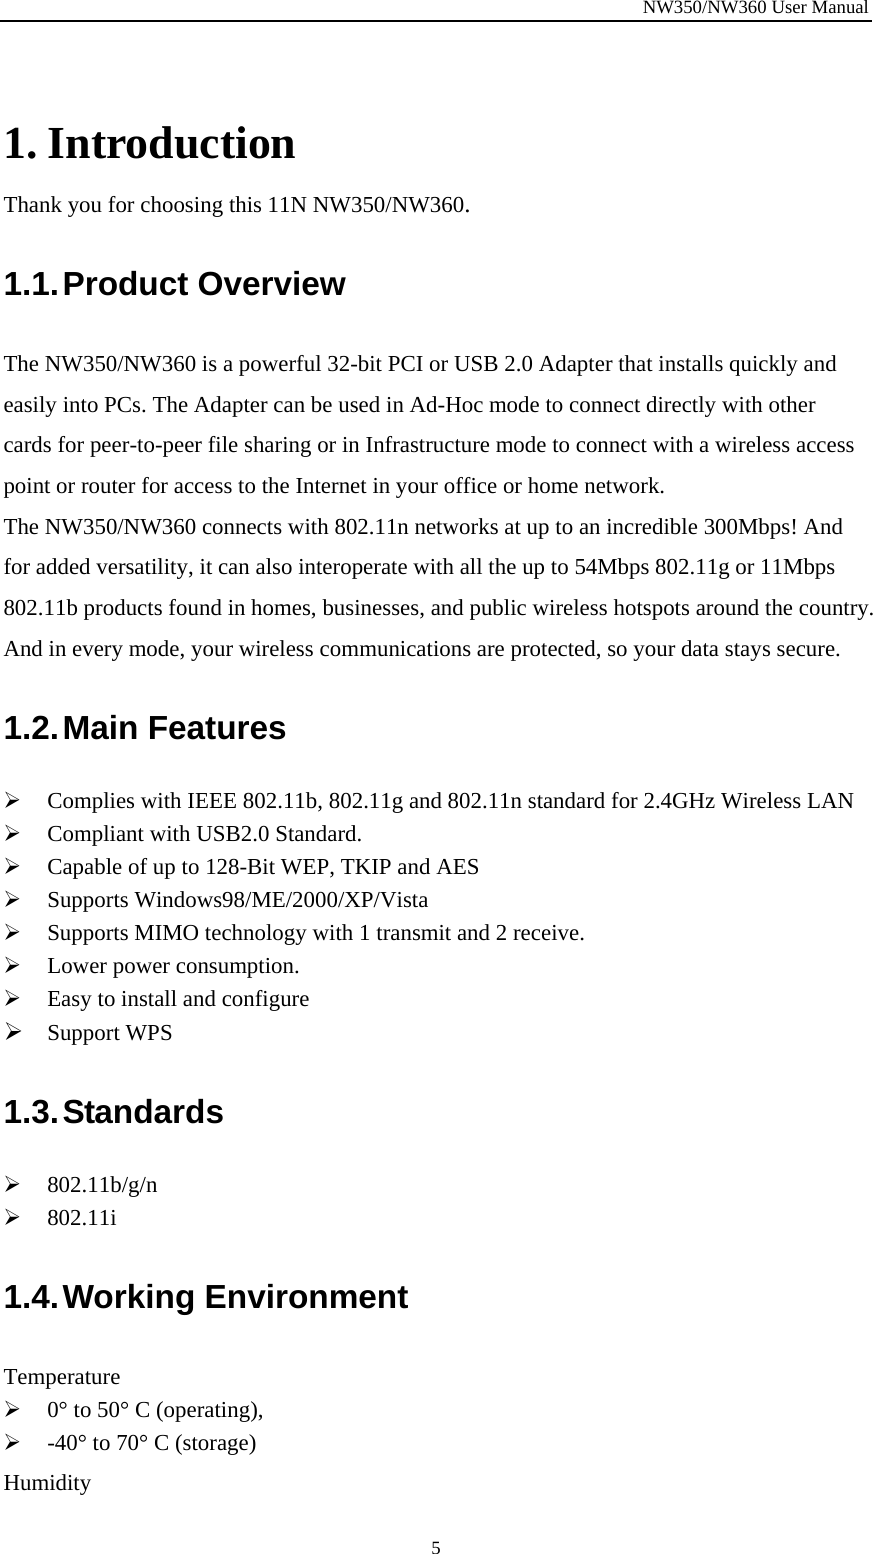 NW350/NW360 User Manual  5 1. Introduction Thank you for choosing this 11N NW350/NW360. 1.1. Product  Overview The NW350/NW360 is a powerful 32-bit PCI or USB 2.0 Adapter that installs quickly and easily into PCs. The Adapter can be used in Ad-Hoc mode to connect directly with other cards for peer-to-peer file sharing or in Infrastructure mode to connect with a wireless access point or router for access to the Internet in your office or home network. The NW350/NW360 connects with 802.11n networks at up to an incredible 300Mbps! And for added versatility, it can also interoperate with all the up to 54Mbps 802.11g or 11Mbps 802.11b products found in homes, businesses, and public wireless hotspots around the country. And in every mode, your wireless communications are protected, so your data stays secure. 1.2. Main  Features ¾ Complies with IEEE 802.11b, 802.11g and 802.11n standard for 2.4GHz Wireless LAN ¾ Compliant with USB2.0 Standard. ¾ Capable of up to 128-Bit WEP, TKIP and AES ¾ Supports Windows98/ME/2000/XP/Vista ¾ Supports MIMO technology with 1 transmit and 2 receive. ¾ Lower power consumption. ¾ Easy to install and configure ¾ Support WPS 1.3. Standards ¾ 802.11b/g/n ¾ 802.11i 1.4. Working  Environment Temperature ¾ 0° to 50° C (operating), ¾ -40° to 70° C (storage) Humidity 